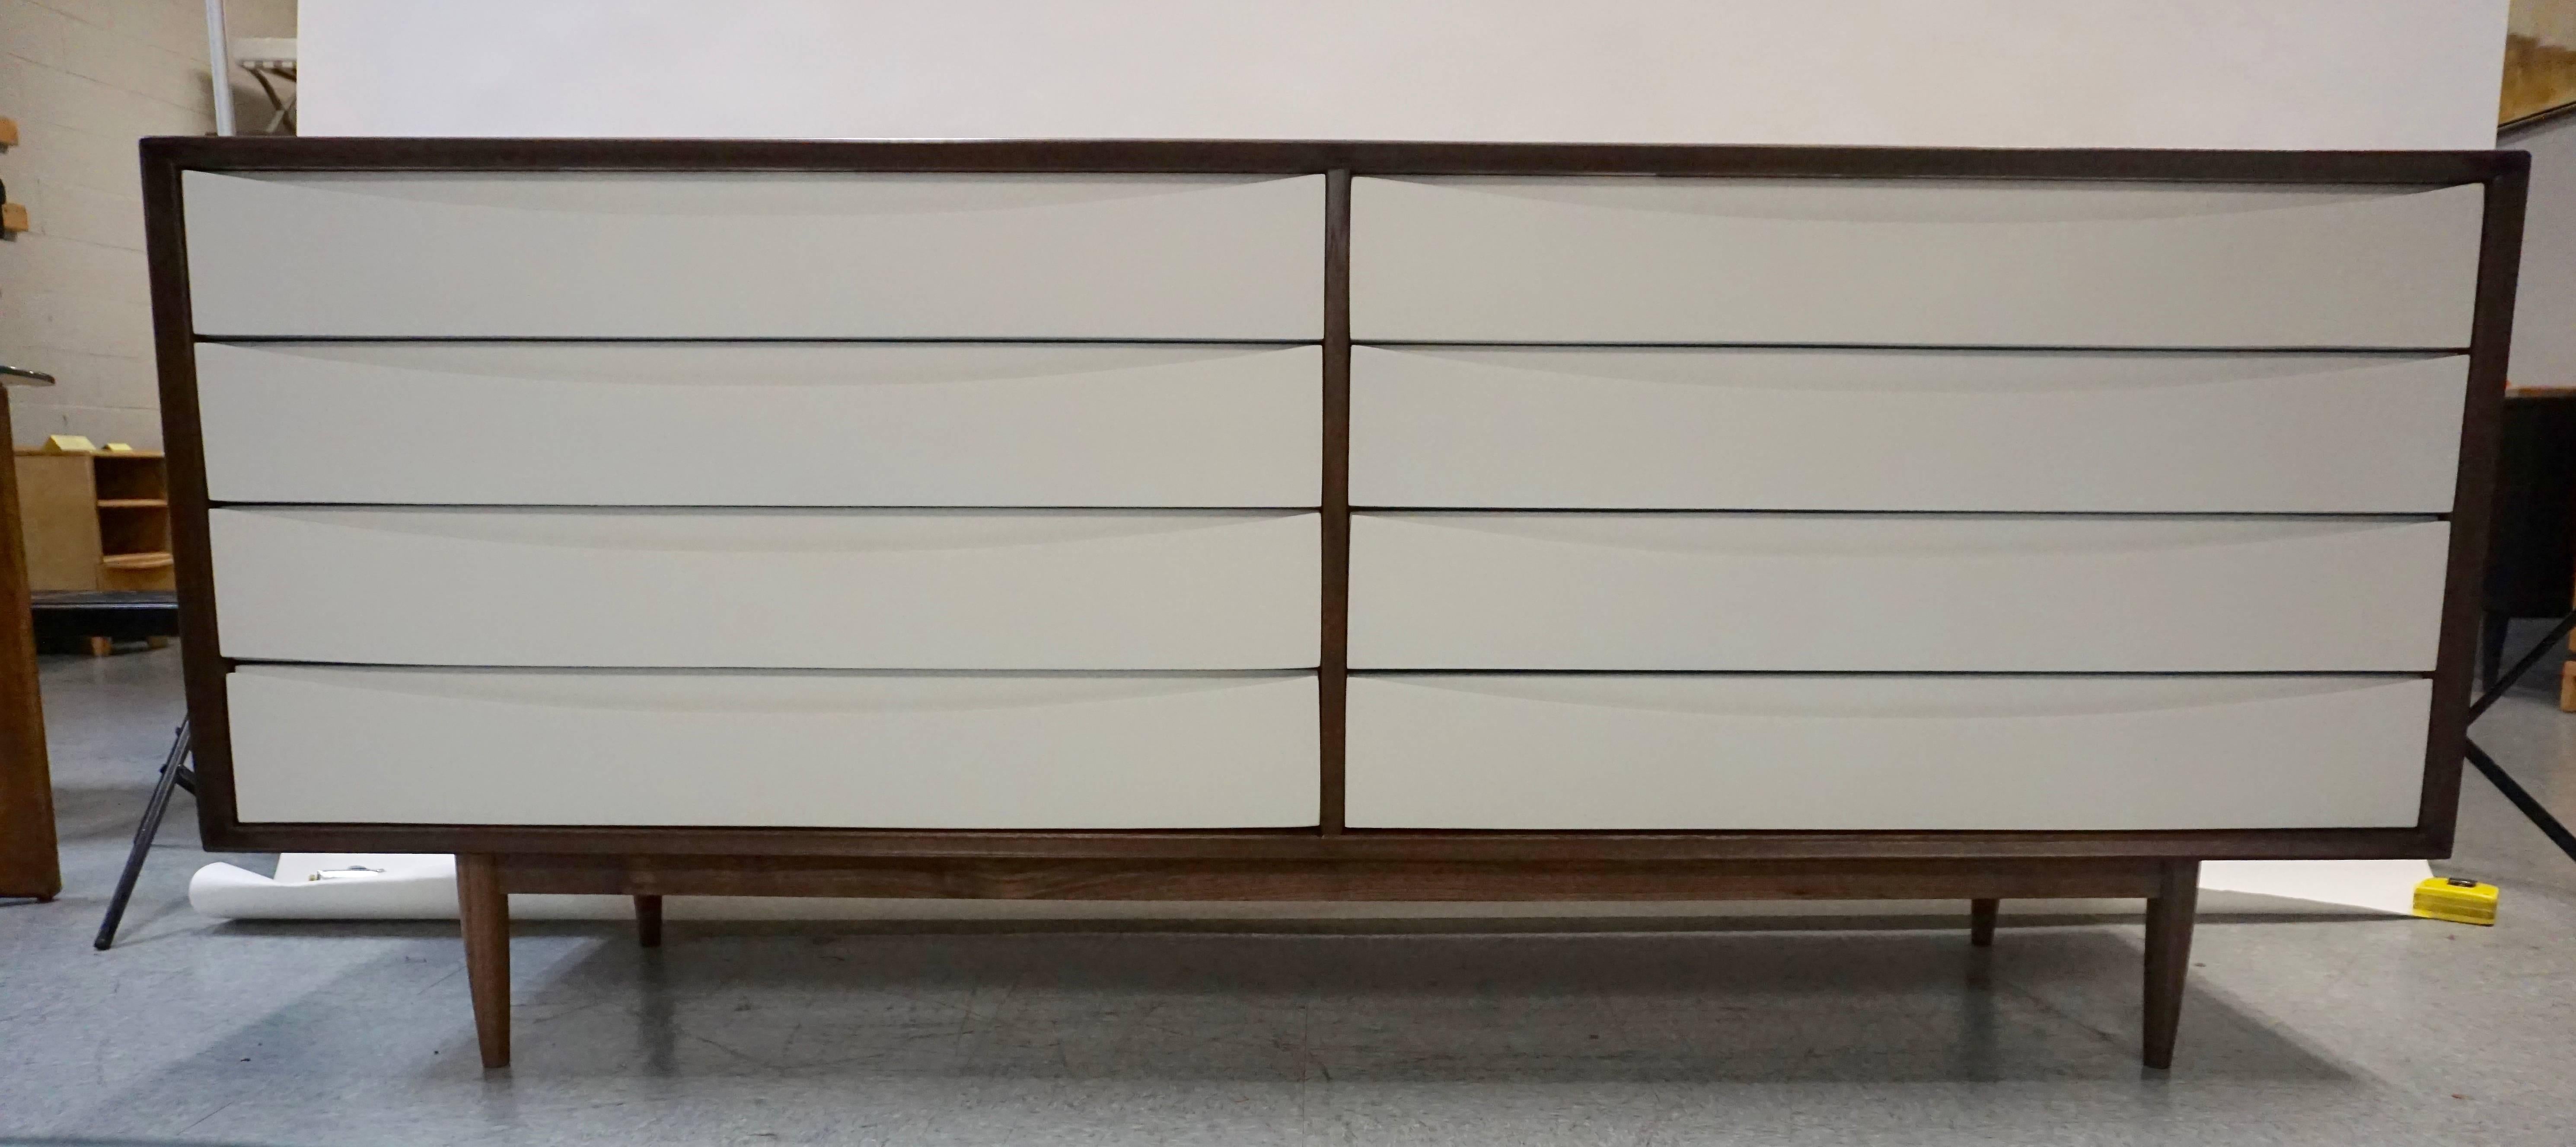 By Sibast Furniture, designed by Arne Vodder. Labeled. Restored. New, flat white lacquered drawer fronts. Finished back. Great condition.